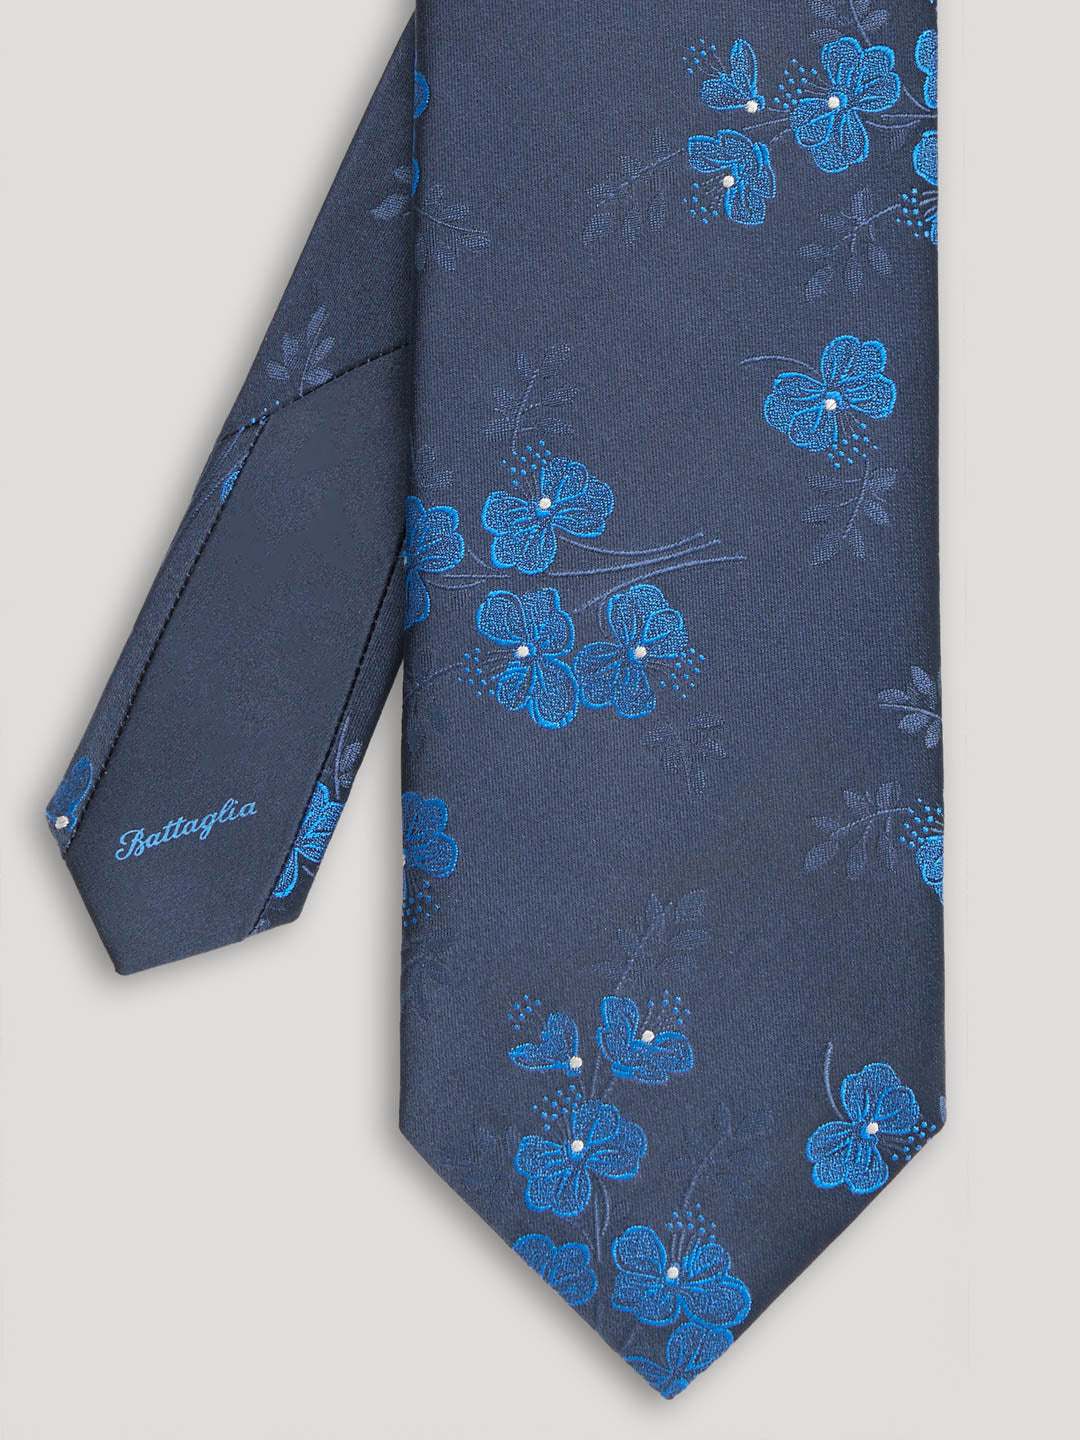 Navy tie with blue woven floral details.